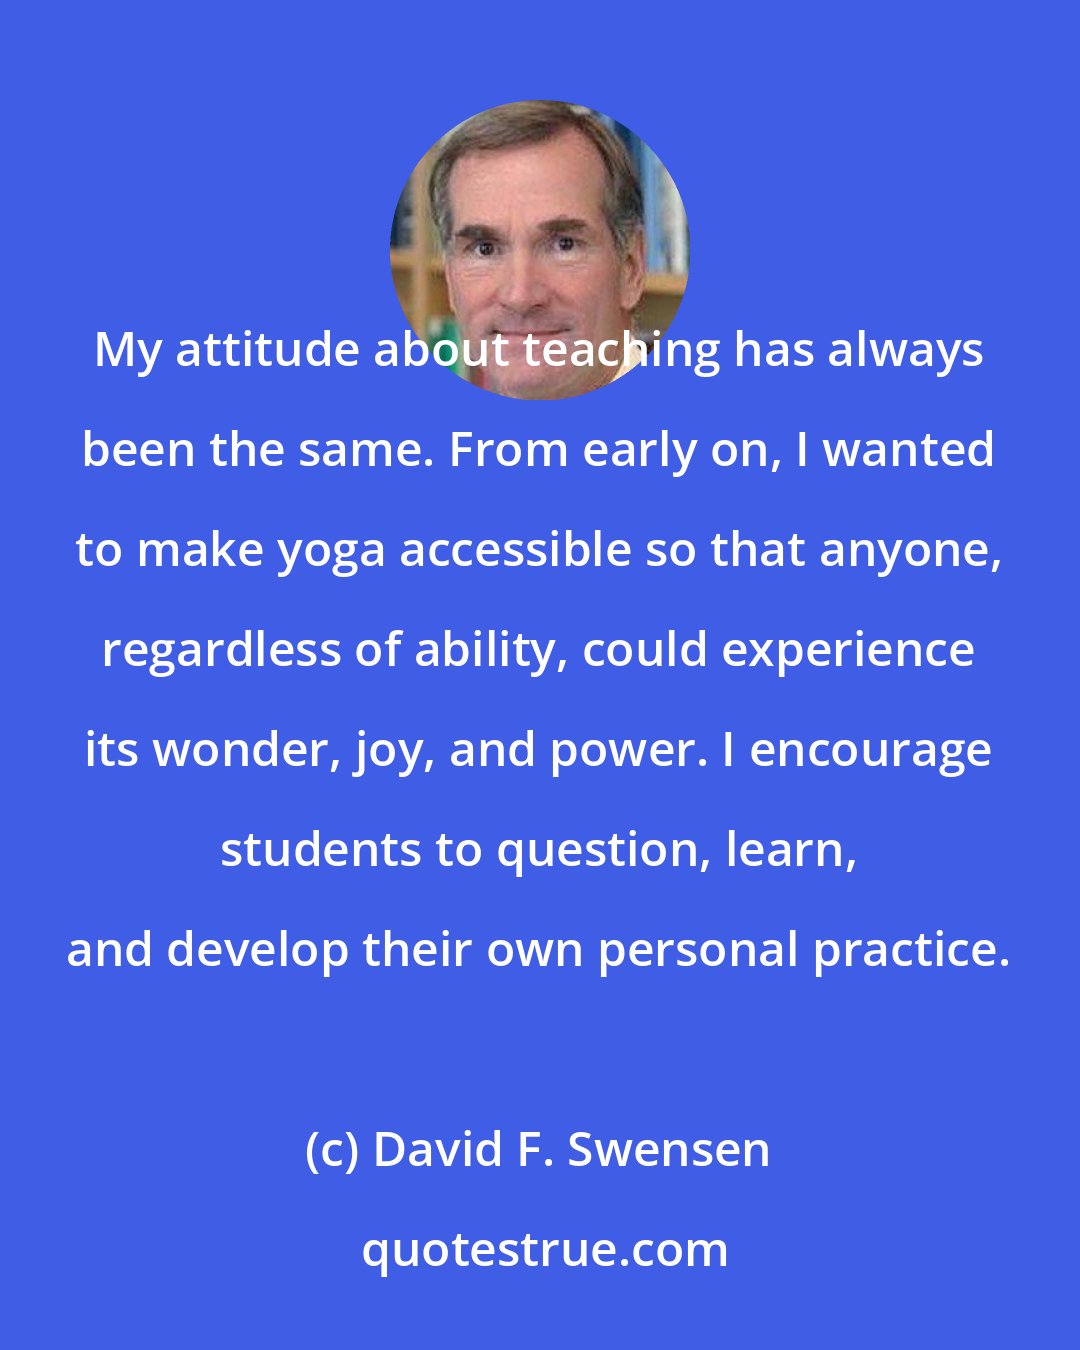 David F. Swensen: My attitude about teaching has always been the same. From early on, I wanted to make yoga accessible so that anyone, regardless of ability, could experience its wonder, joy, and power. I encourage students to question, learn, and develop their own personal practice.